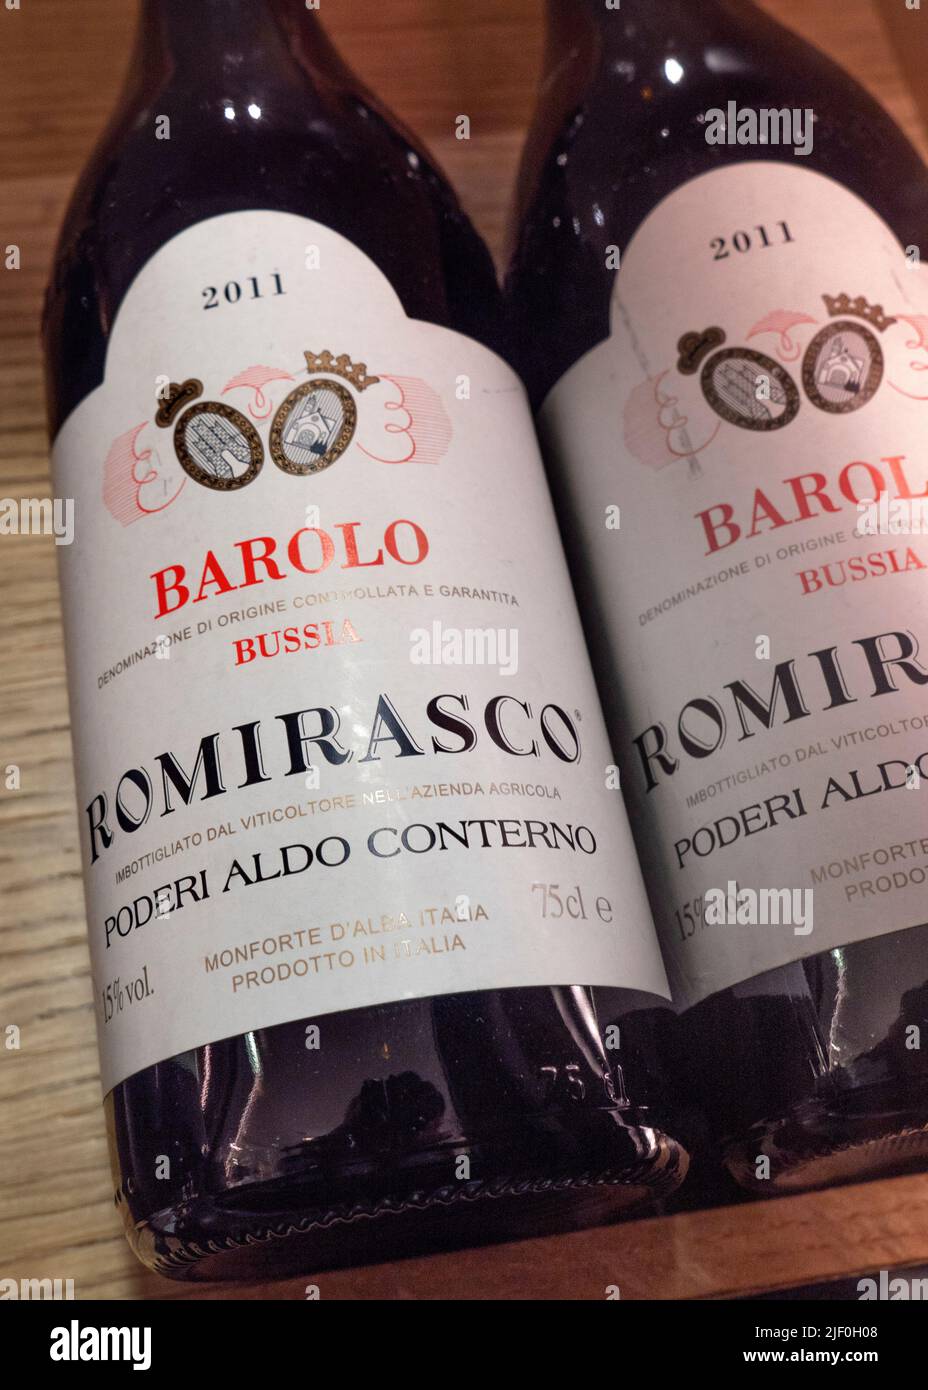 BAROLO Italian Wine on display for sale at Fortnum and Mason wine department.  2011 Poderi Aldo Conterno Romirasco Bussia Barolo DOCG, Italy The Romirasco vineyard sits high on the Bussia Soprana hill. It is owned entirely by the Conterno family and is one of their most important single-vineyard Barolo. In 2011, this is an intensely vibrant wine with a bouquet of violets and roses, with notes of balsamic, liquorice and leather. With an elegant structure, the wine is beautifully balanced with pristine fruit and excellent length. Stock Photo